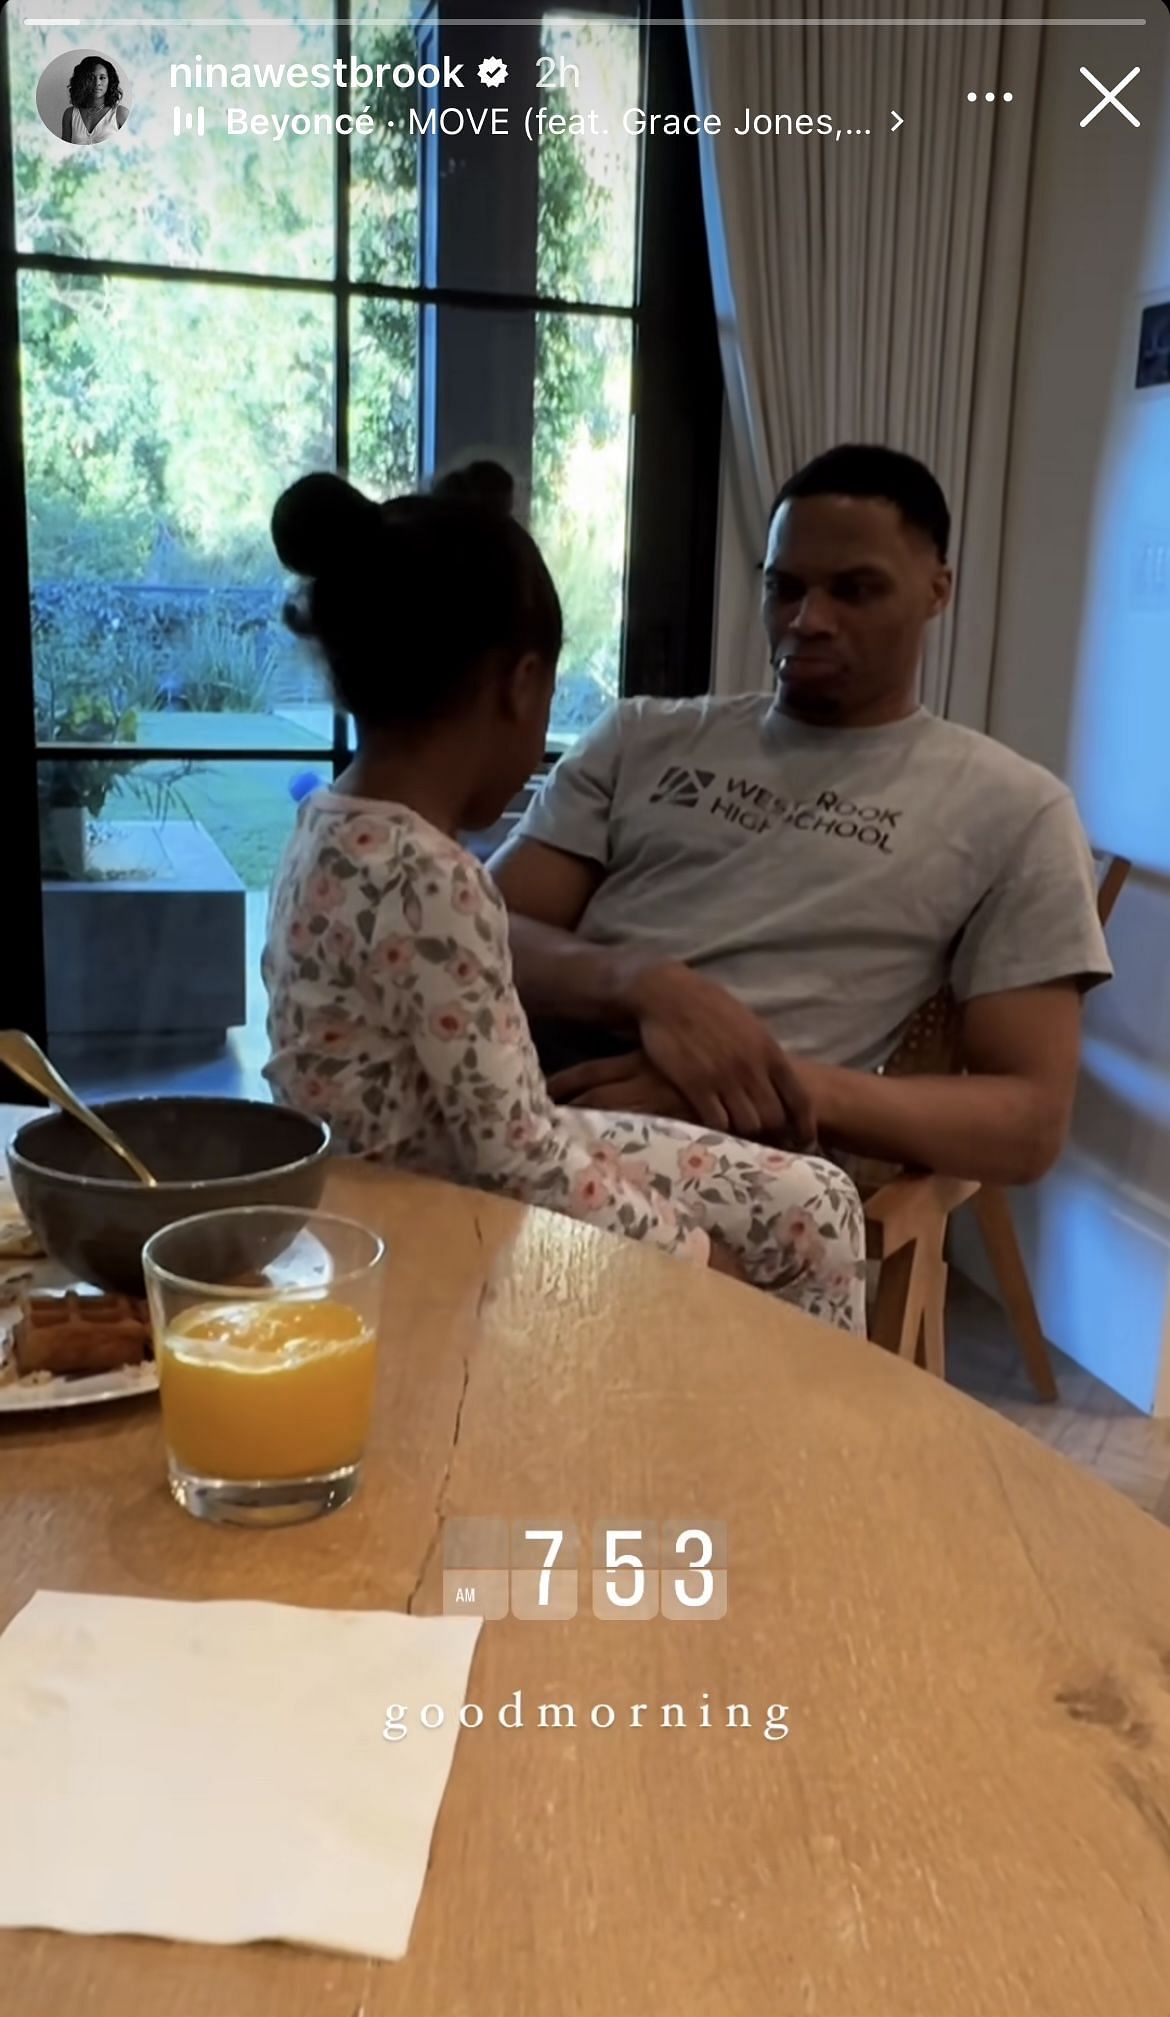 Russell Westbrook does matching dances moves with daughter - Nina Westbrook&#039;s Instagram story